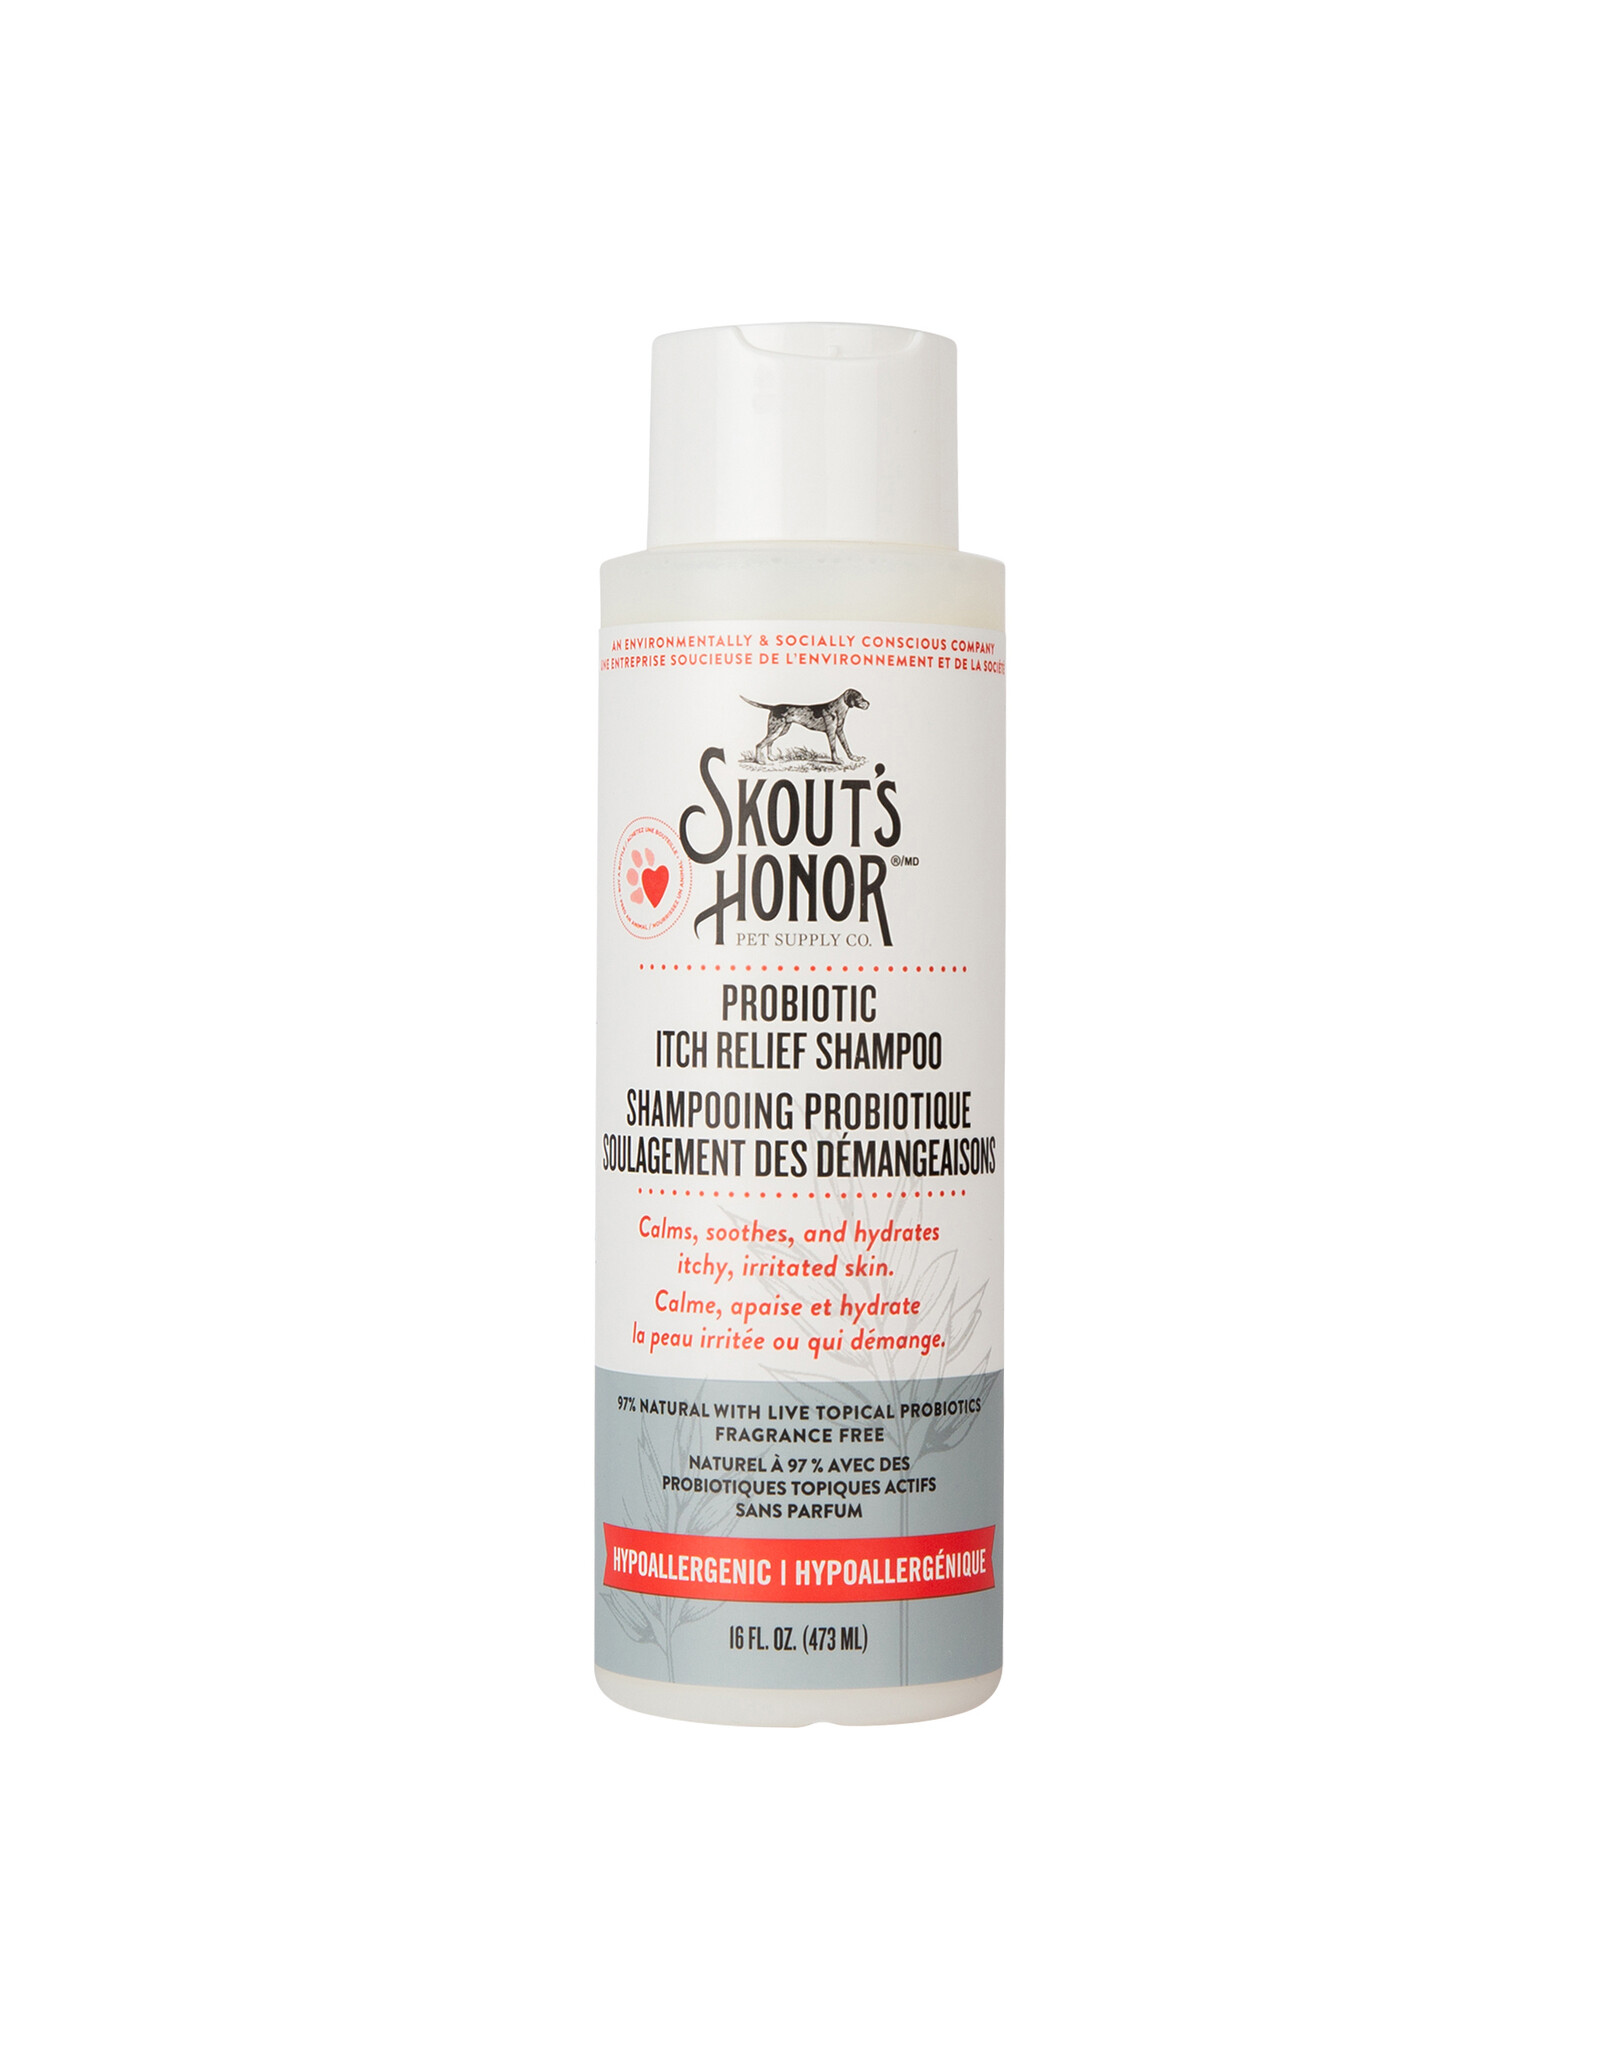 Skout's Honor Probiotic Itch Relief Shampoo 16oz